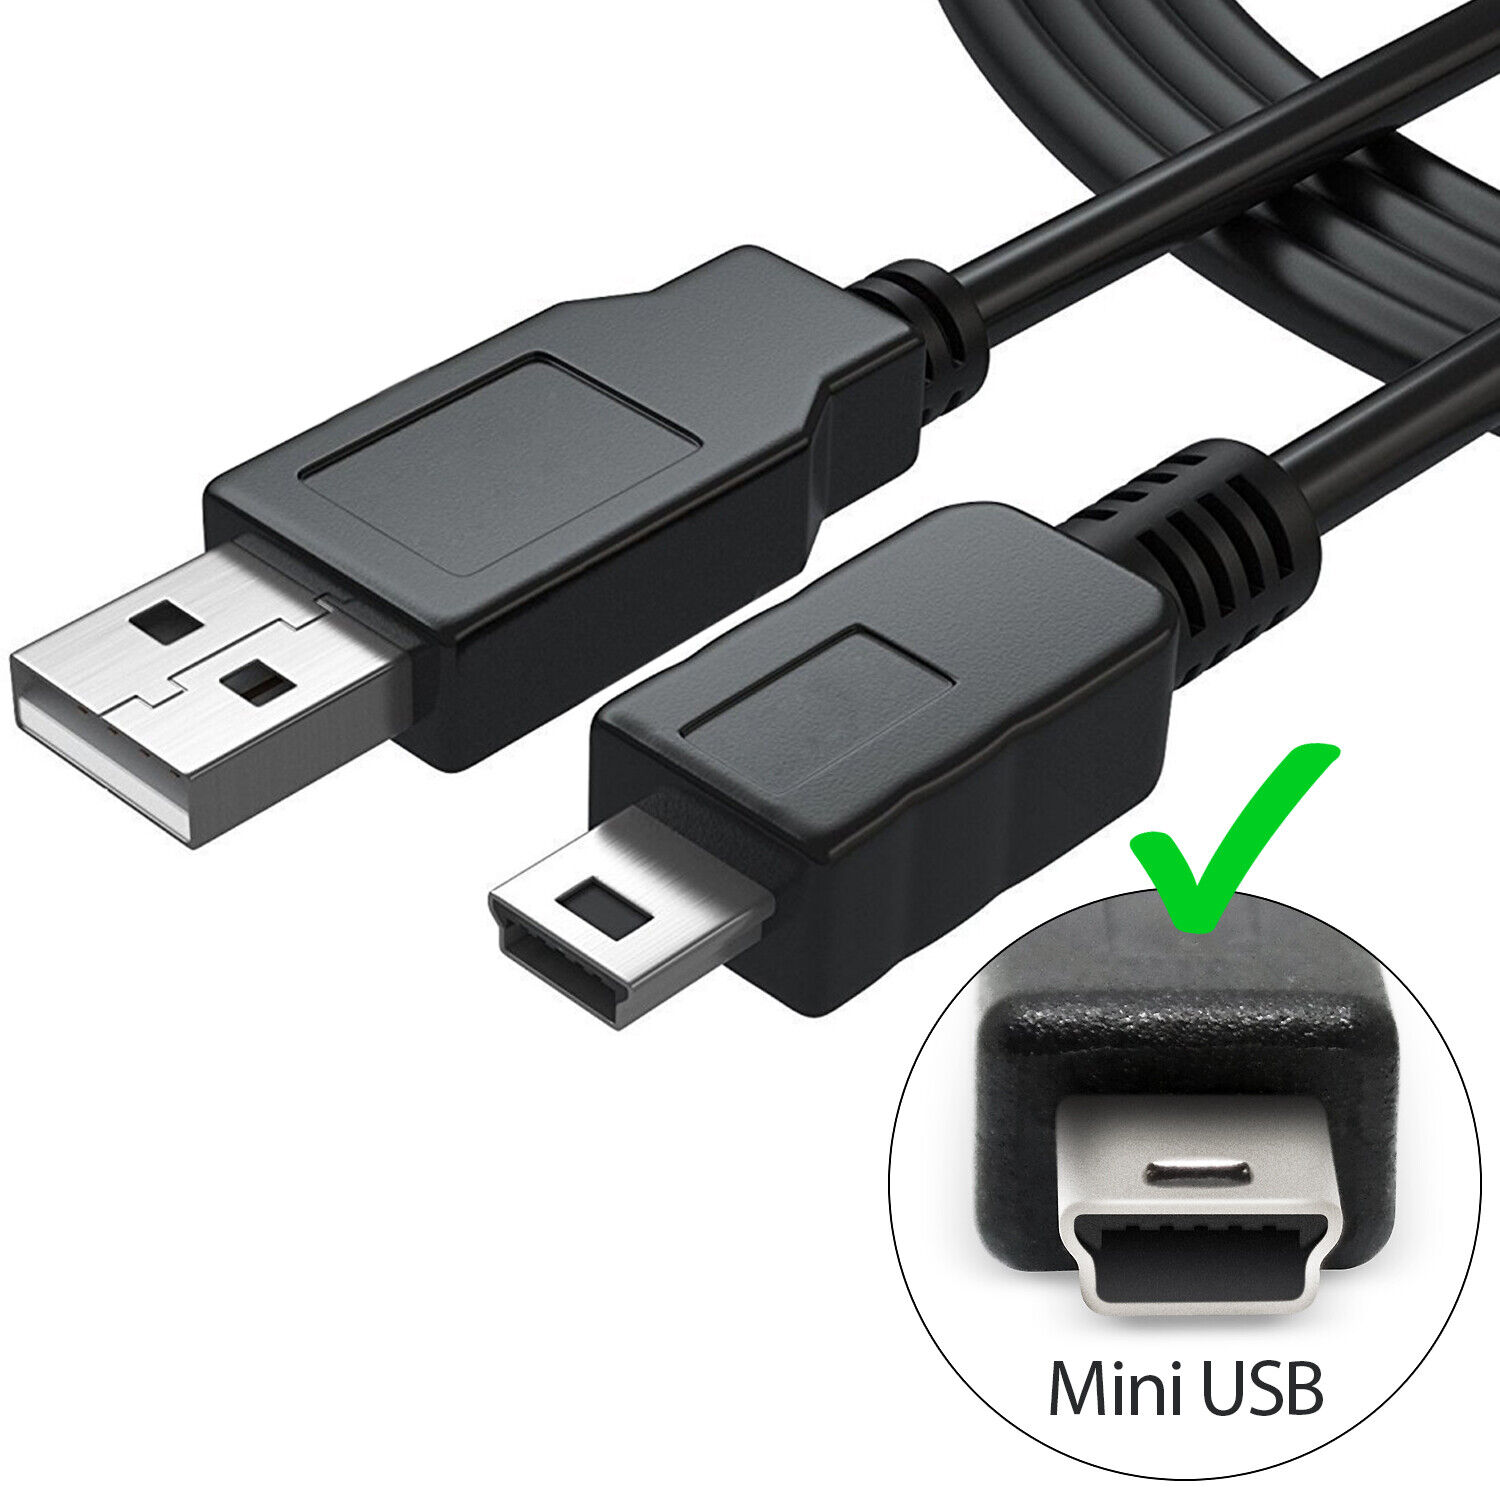 1pc Mini USB Cable Charge & Sync Data Lead Phone Fast Charger For MP3 MP4  Player Car DVR GPS Digital Camera HDD Cord Mobile Phone Hard Drive 80cm/31.5